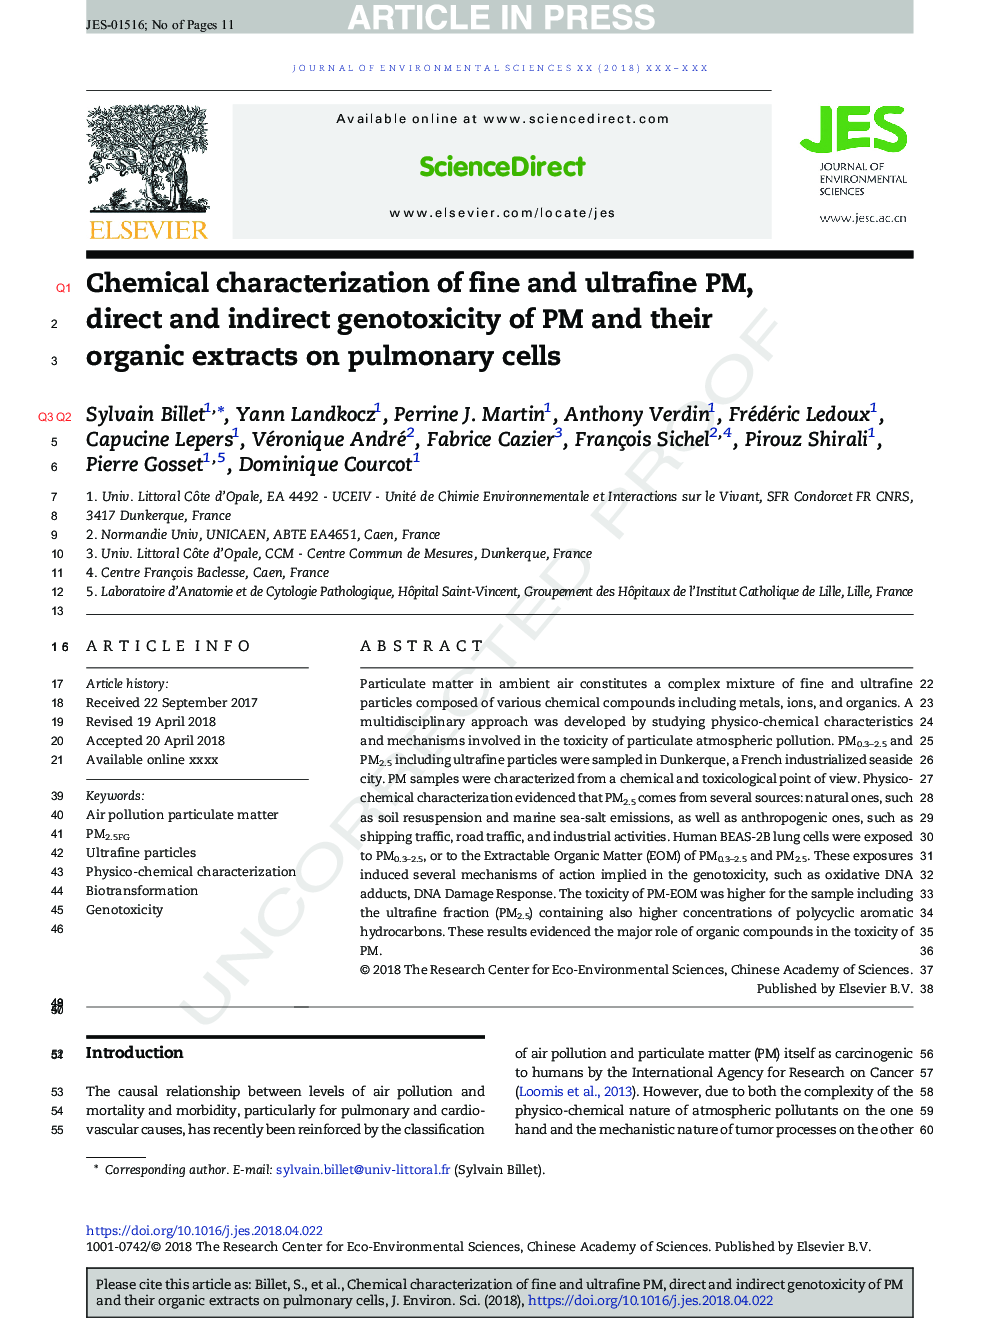 Chemical characterization of fine and ultrafine PM, direct and indirect genotoxicity of PM and their organic extracts on pulmonary cells